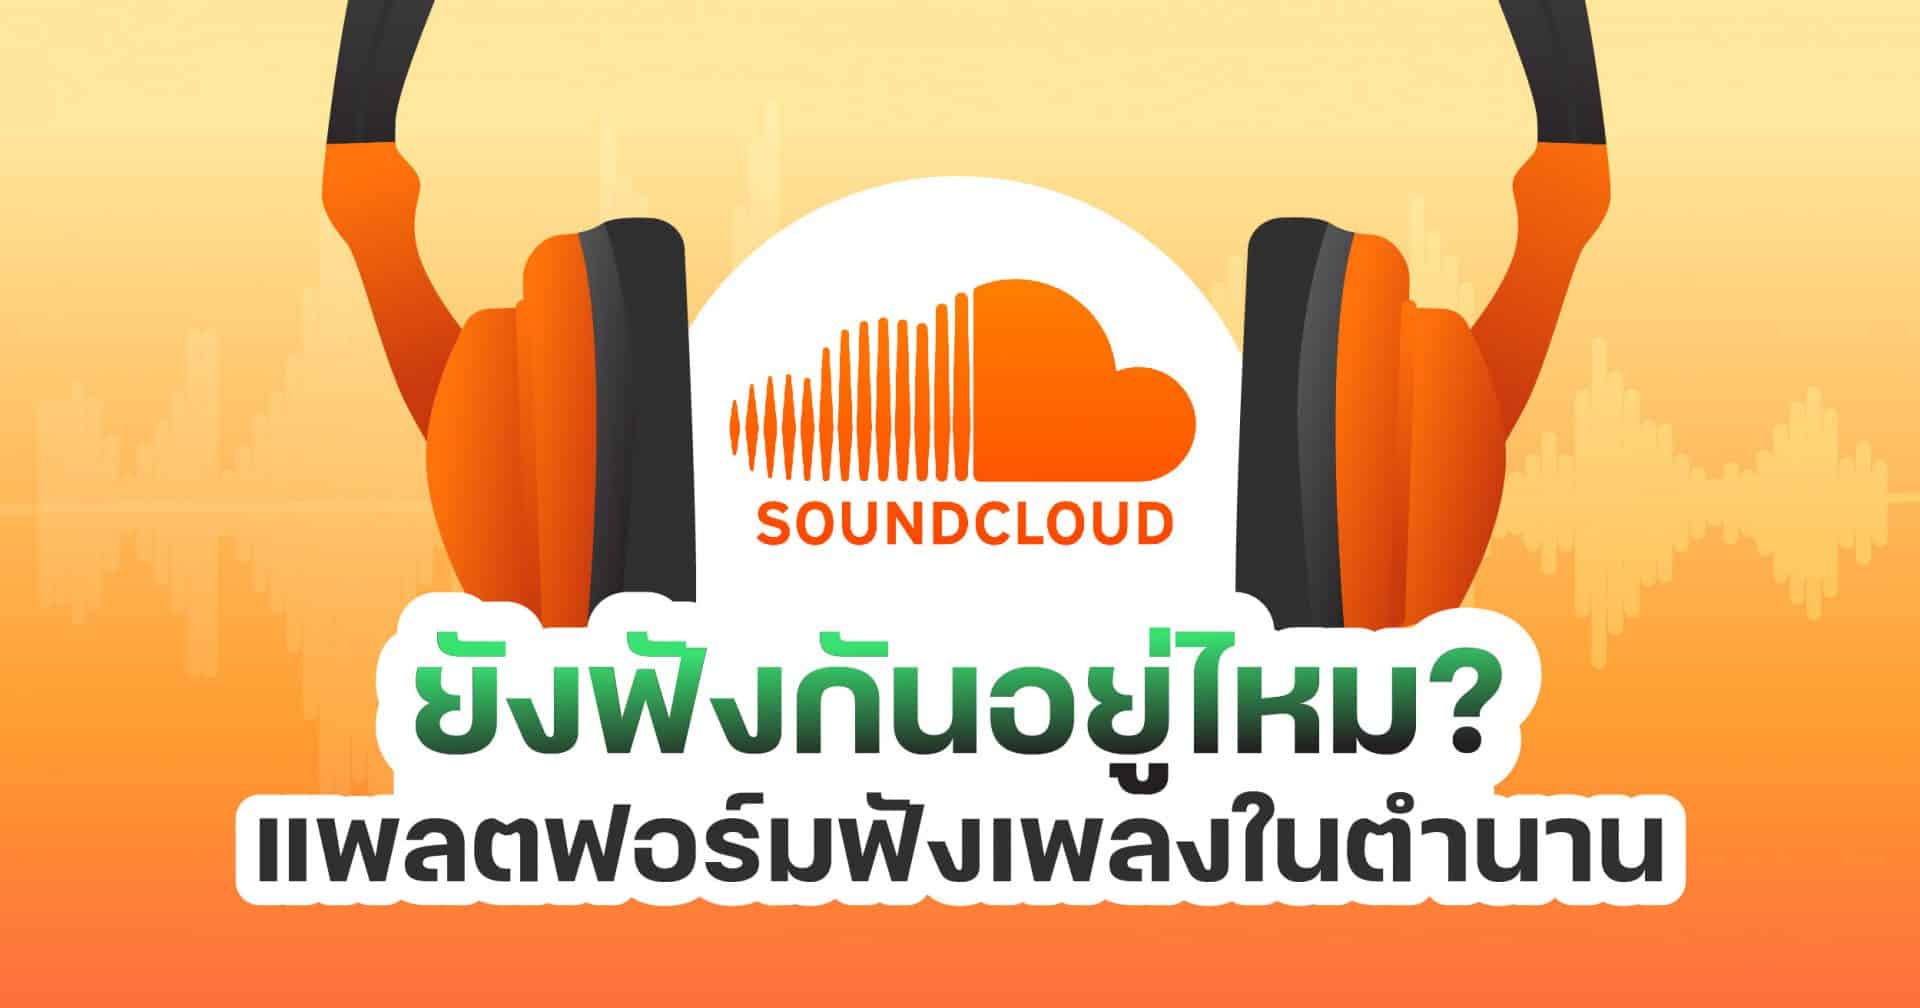 What is SoundCloud?